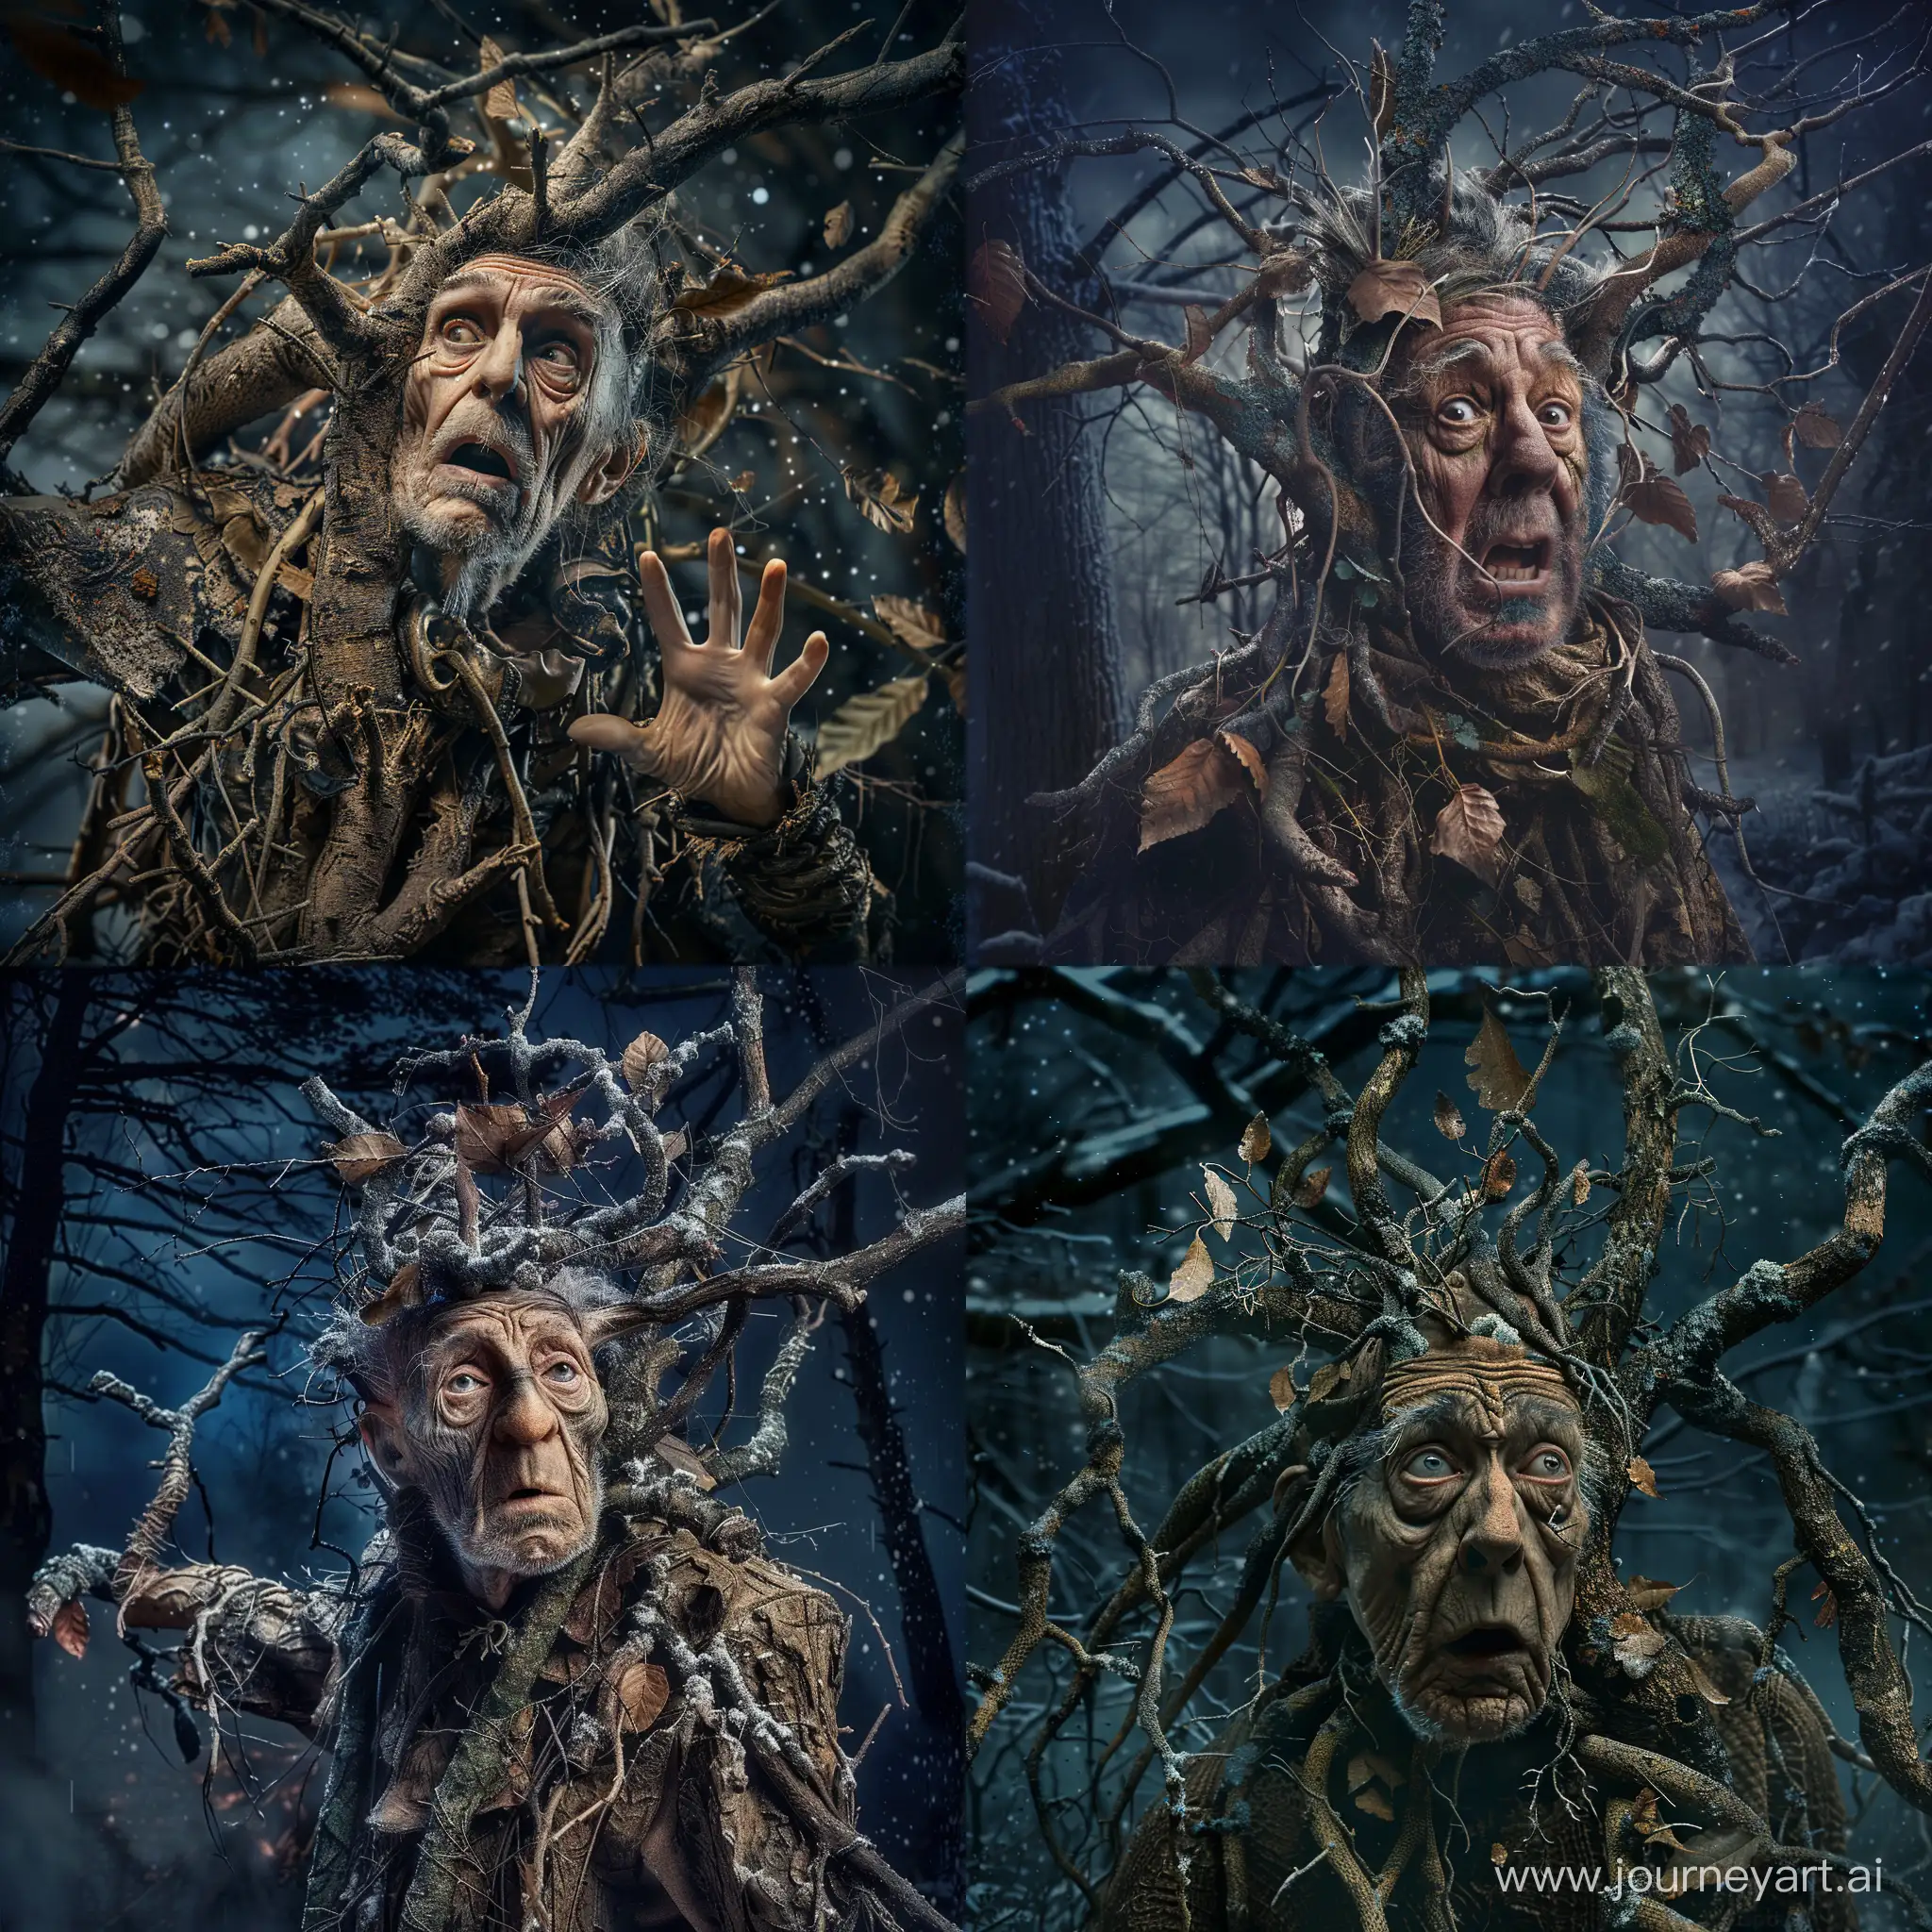 A photograph of a old man who has been transformed into a tree due to a magic spell. He has branches, roots, bark and leaves. He is in a cold forest at night with a scared expression.